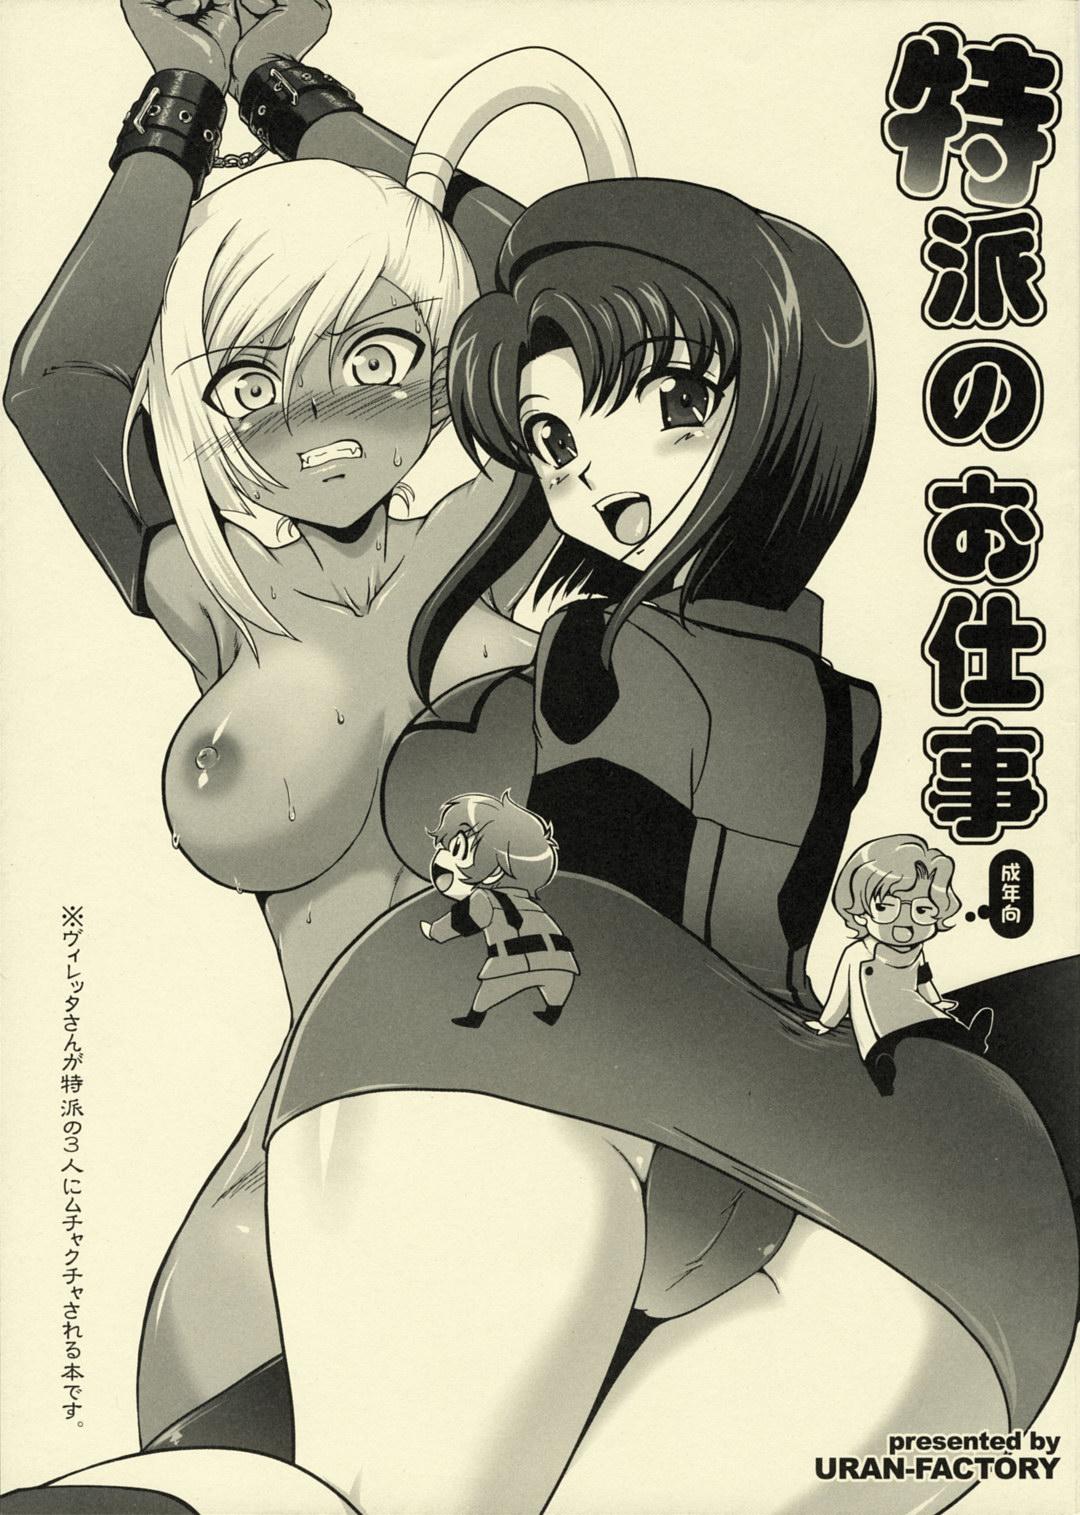 Prostitute Tokuha no Oshigoto | Special Envoy's Work - Code geass Alone - Page 1